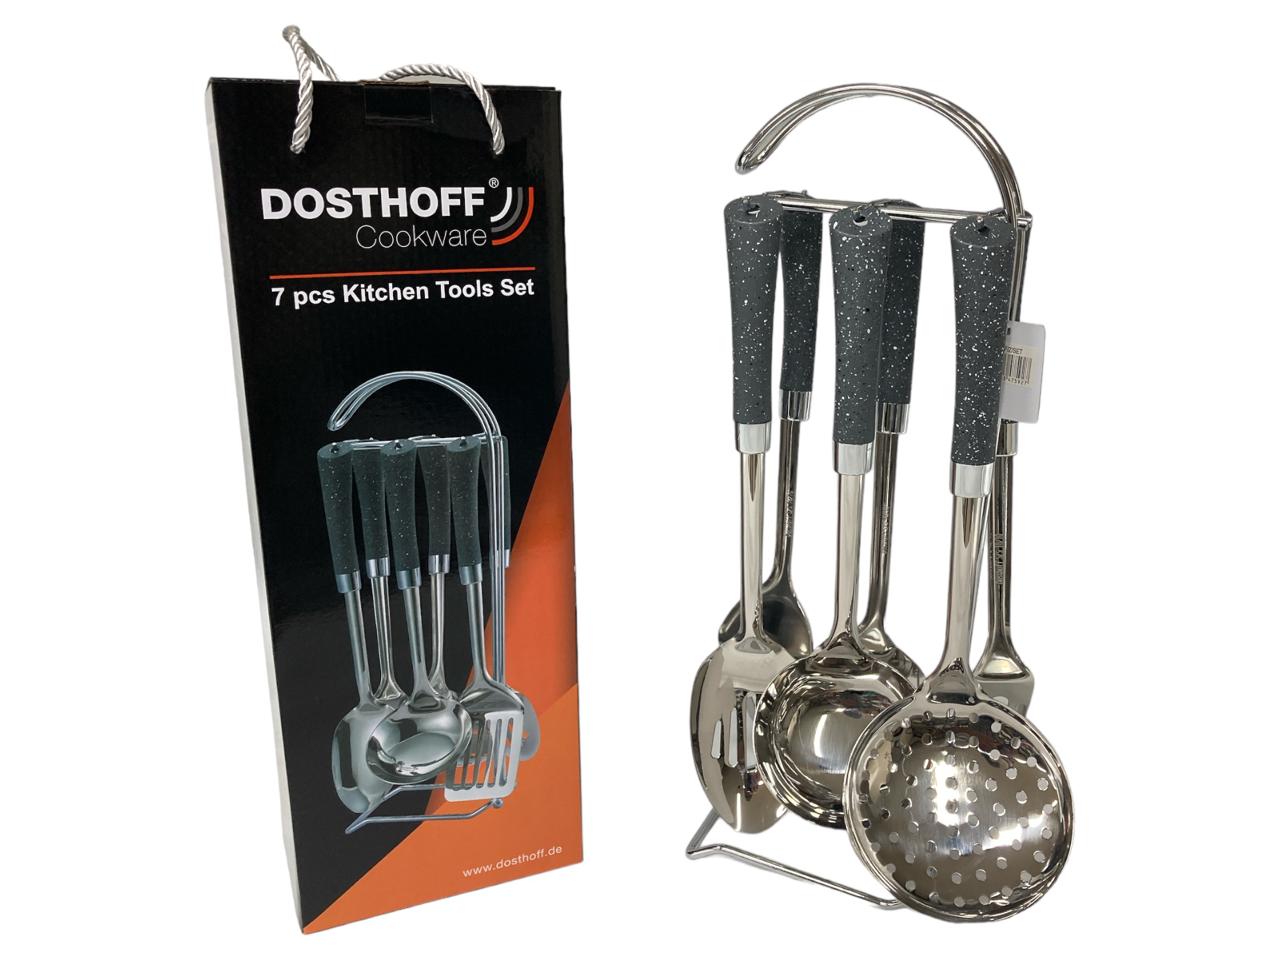 DOSTHOFF STAINLESS STEEL 7 PIECES KITCHEN TOOLS SET